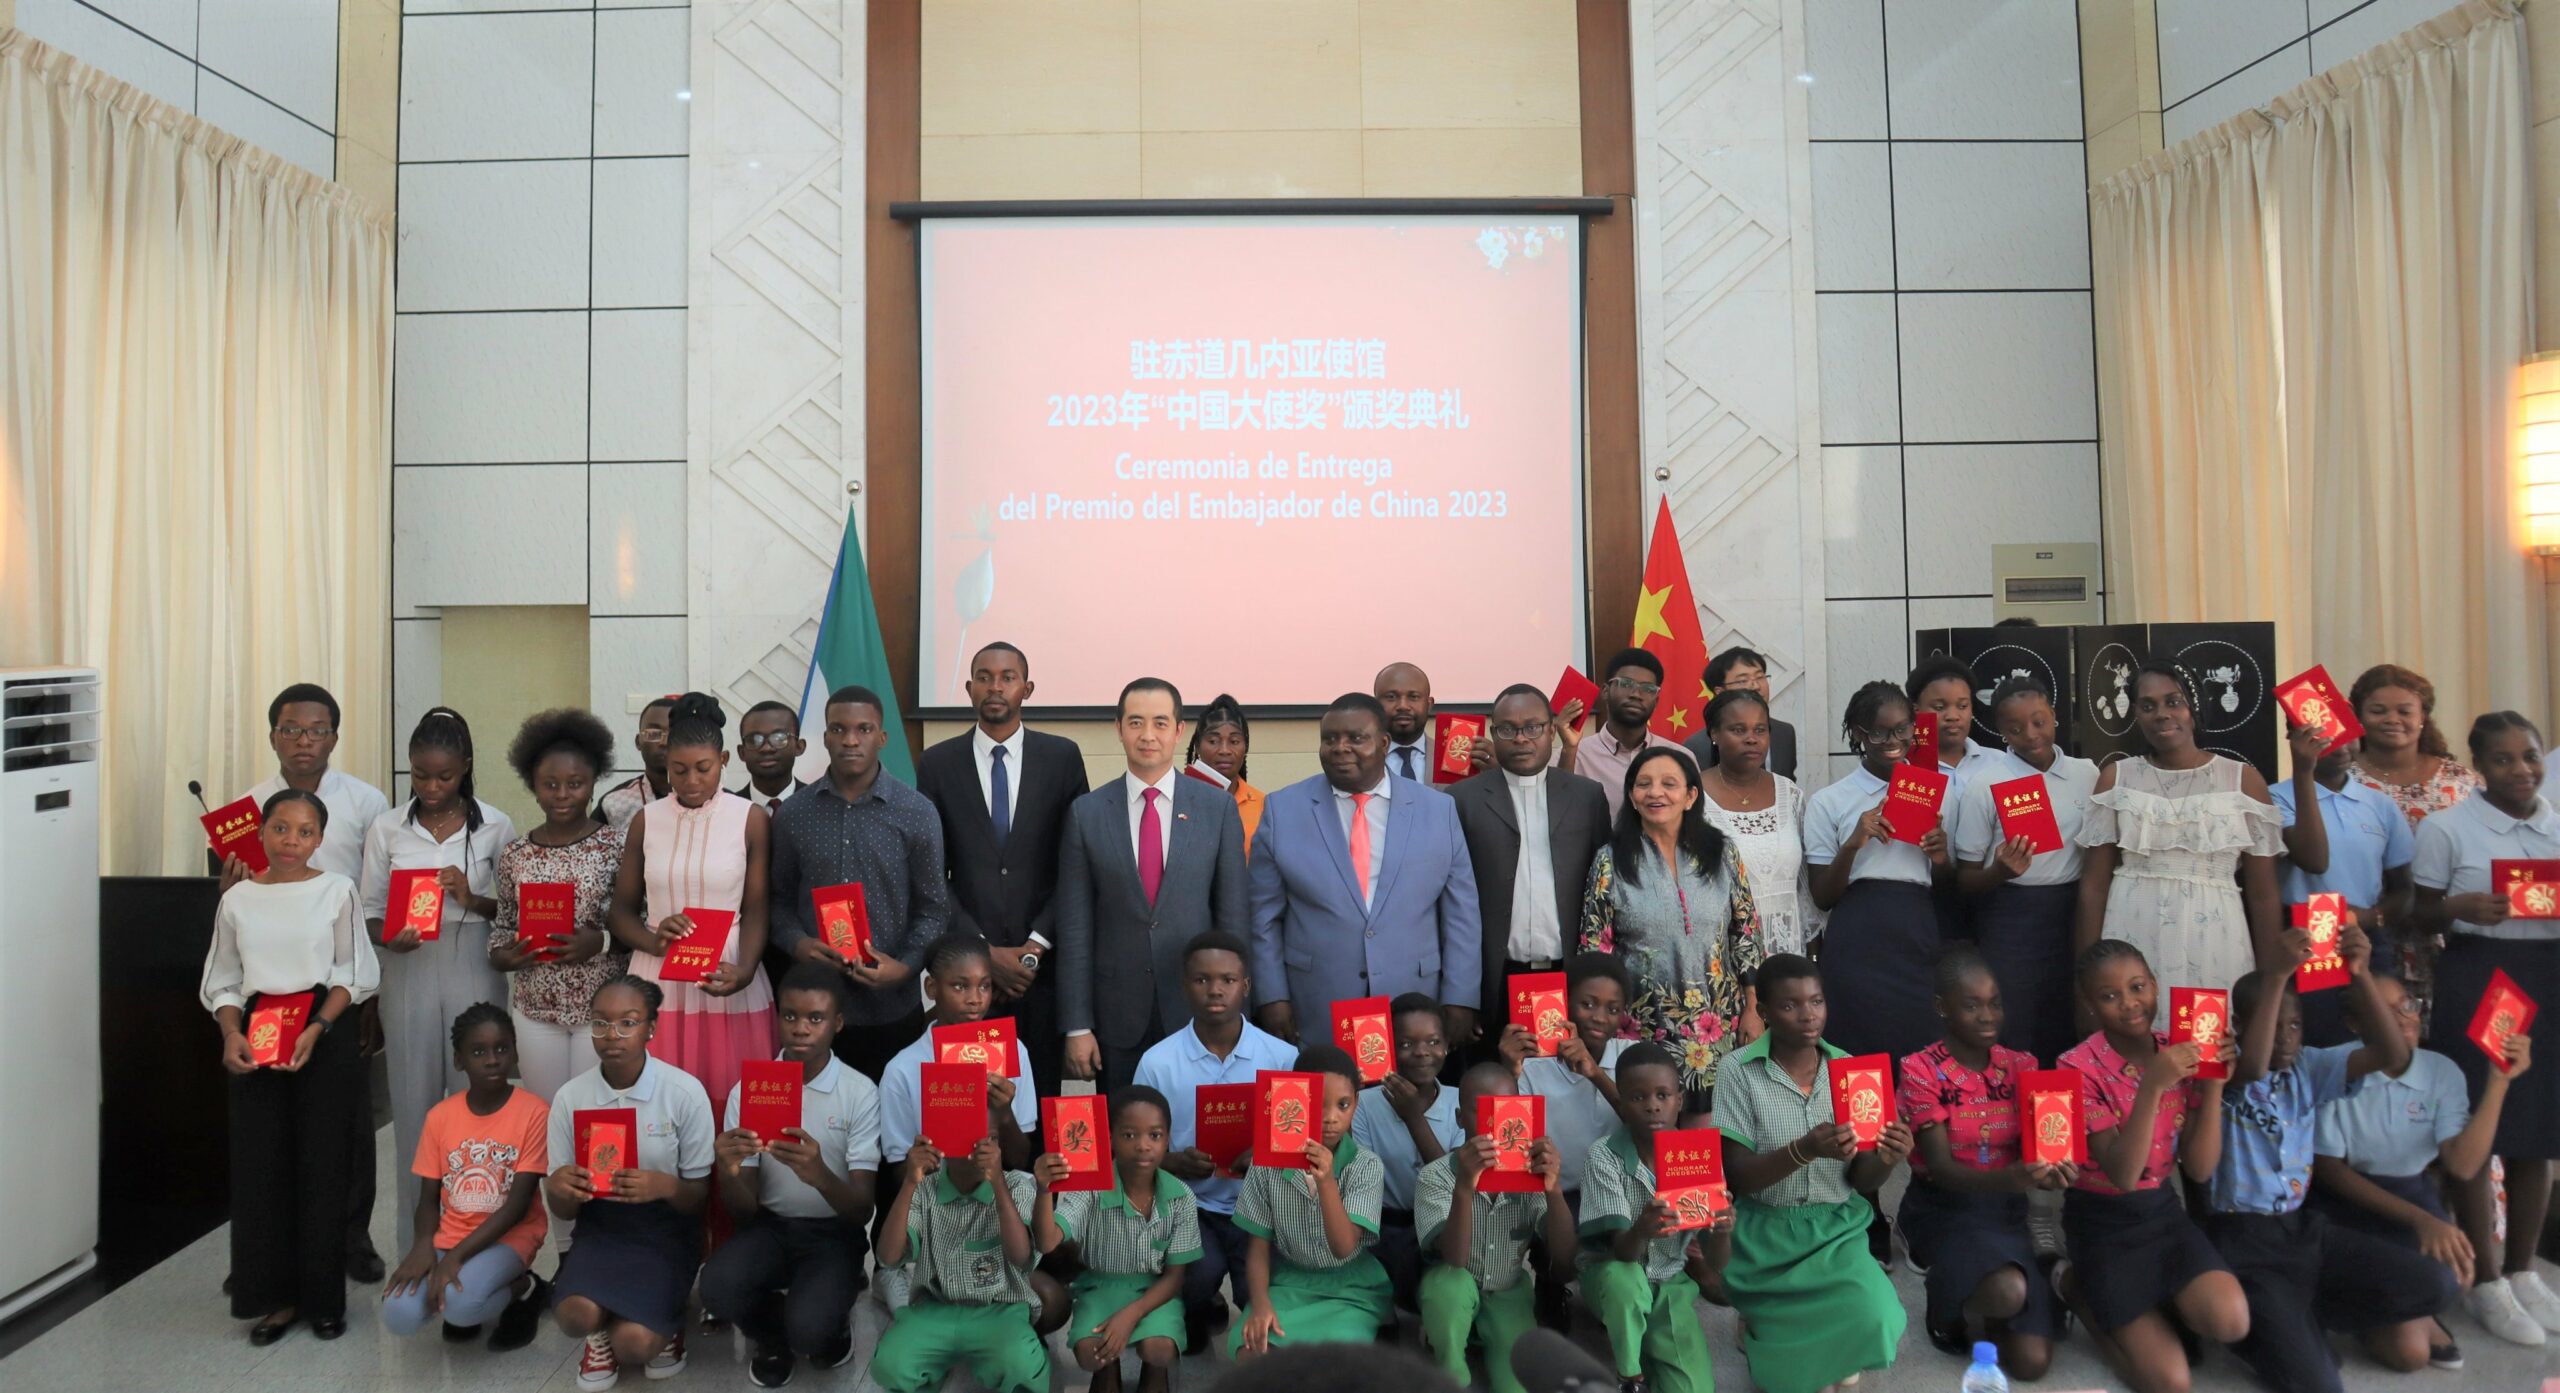 Celebrating Student Excellence: Chinese Chargé d'Affaires Awards 47 Students in Malabo, Equatorial Guinea